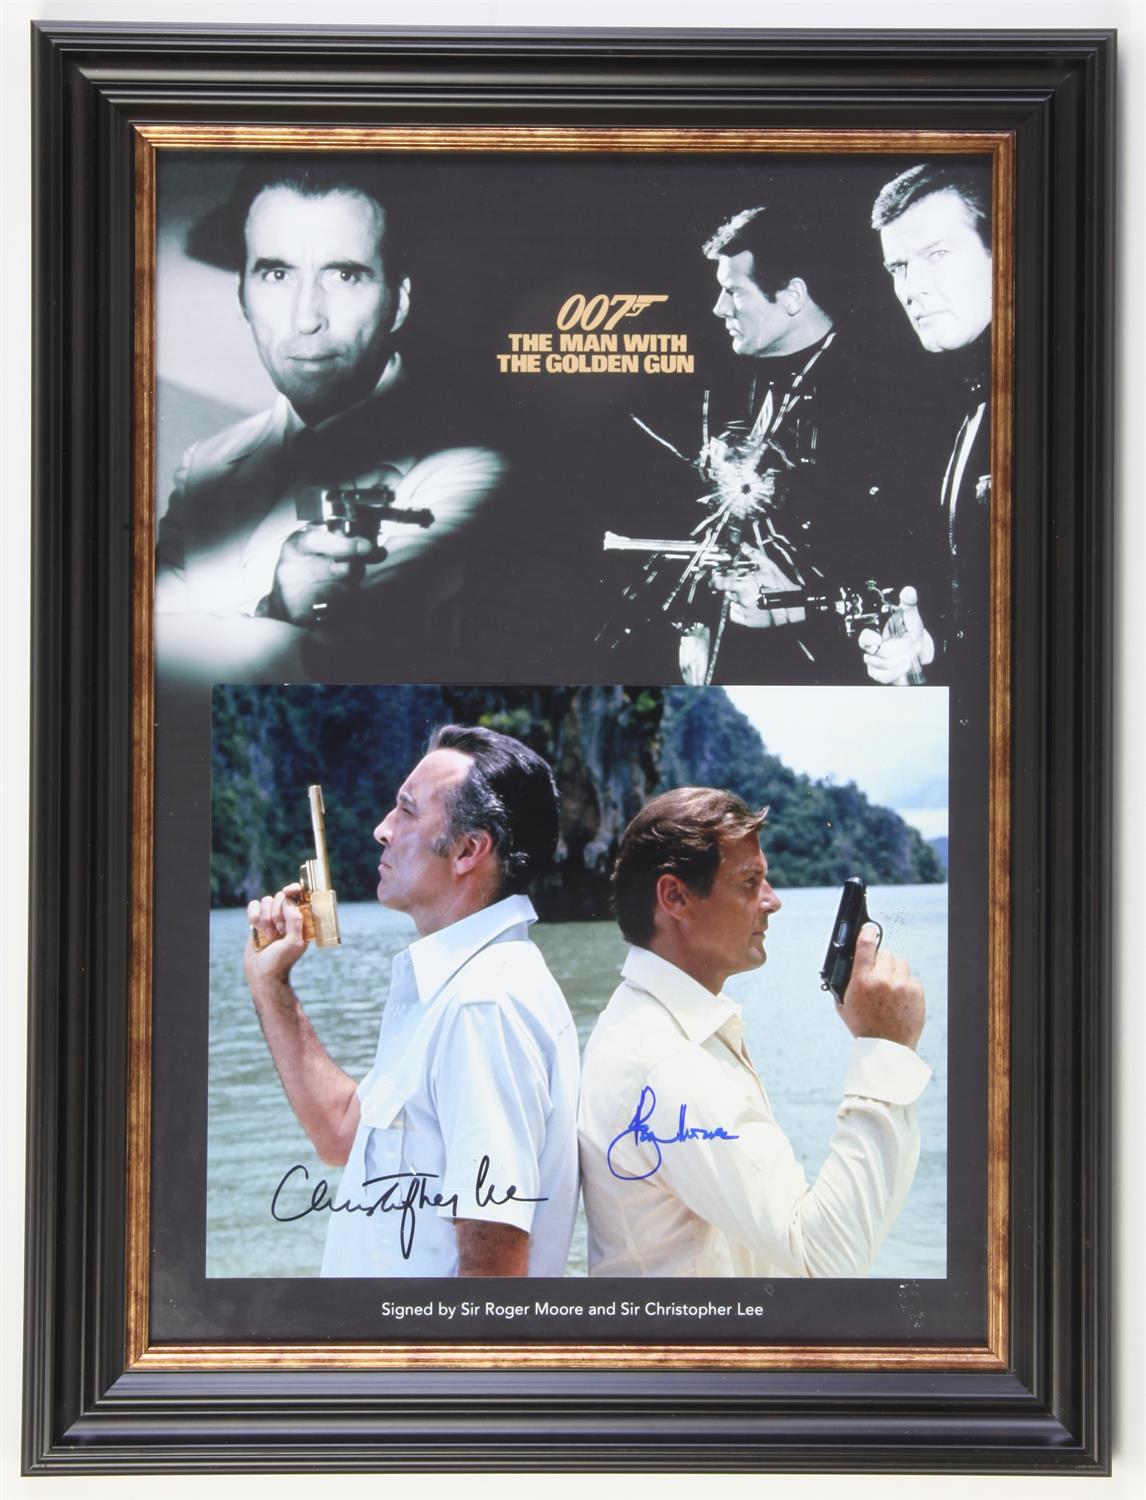 James Bond The Man With the Golden Gun - Colour photo signed by Roger Moore and Christopher Lee,